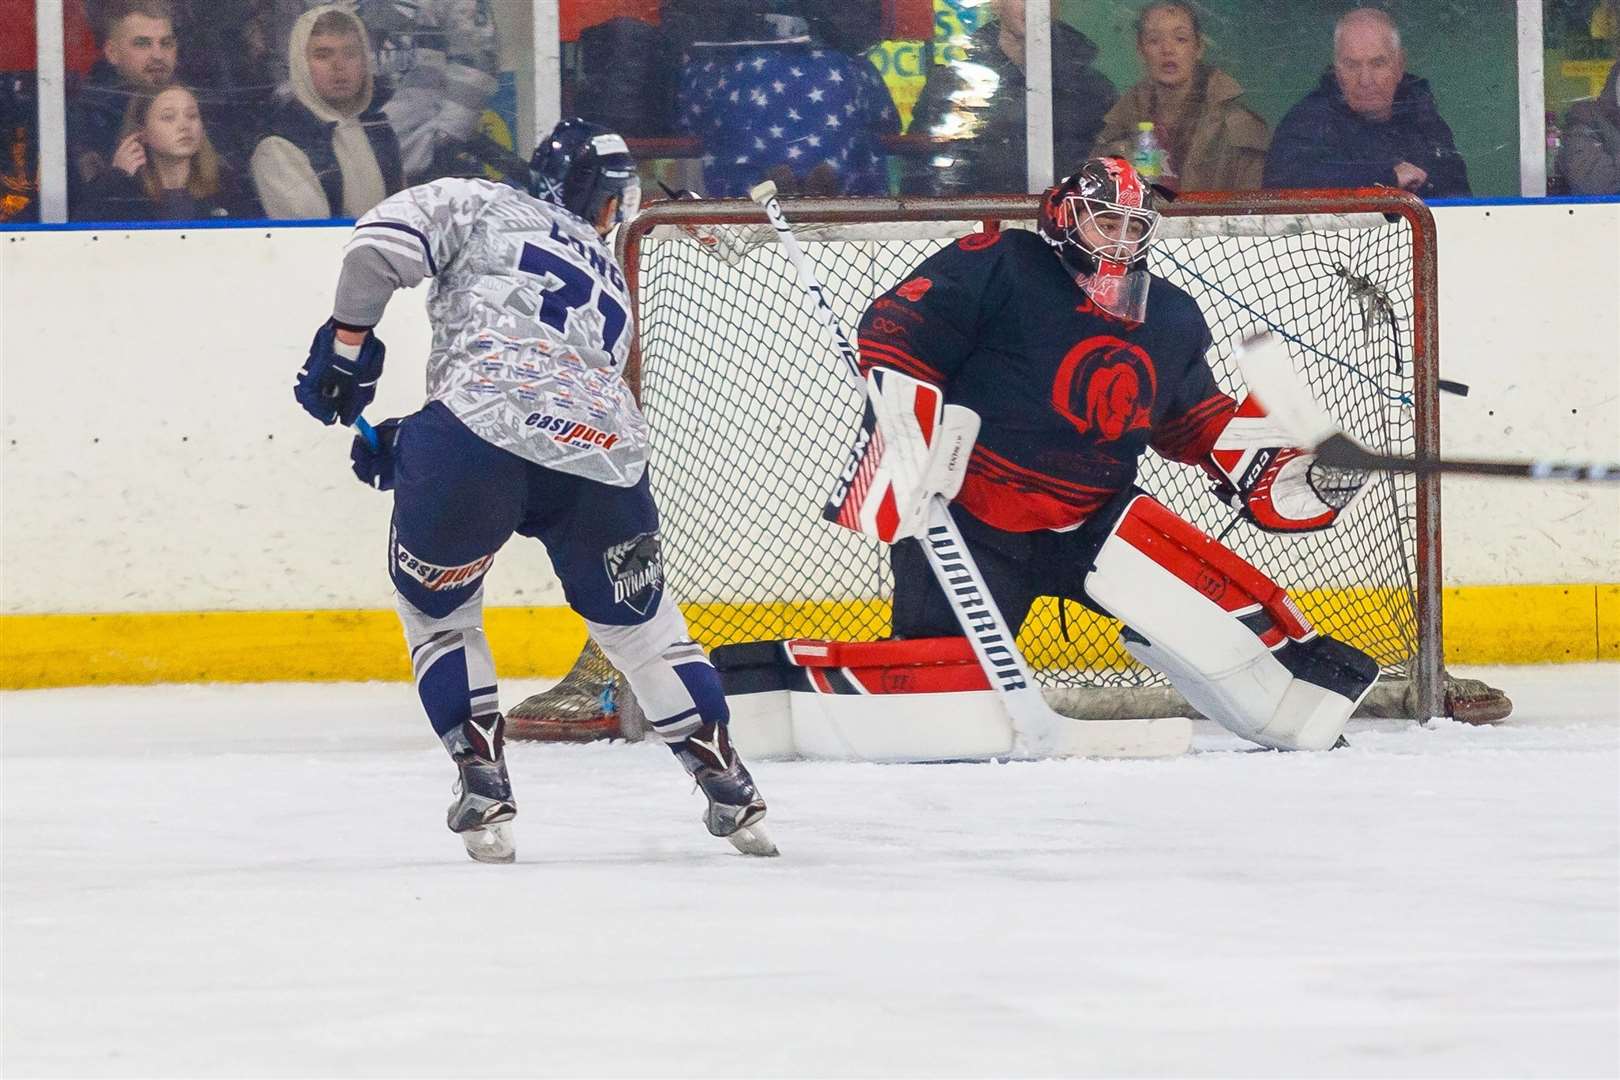 Tom Long inches away from taking his second goal of the season for Invicta Dynamos Picture: David Trevallion